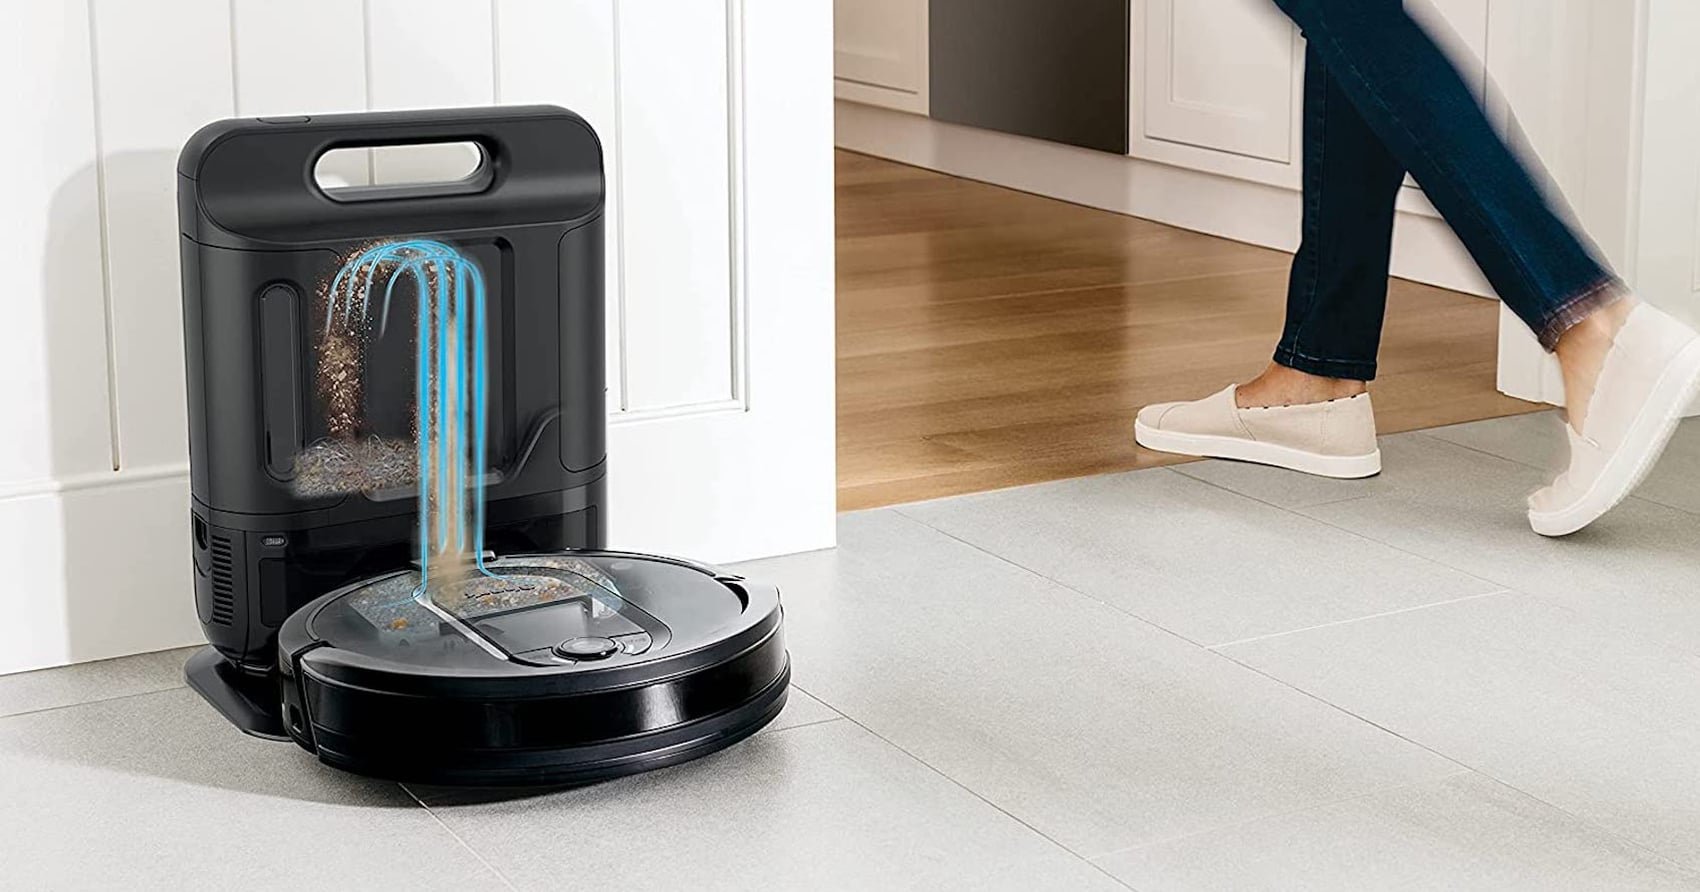 This Robot Vacuum Does All the Work For You, and It's 50% Off For Cyber Monday